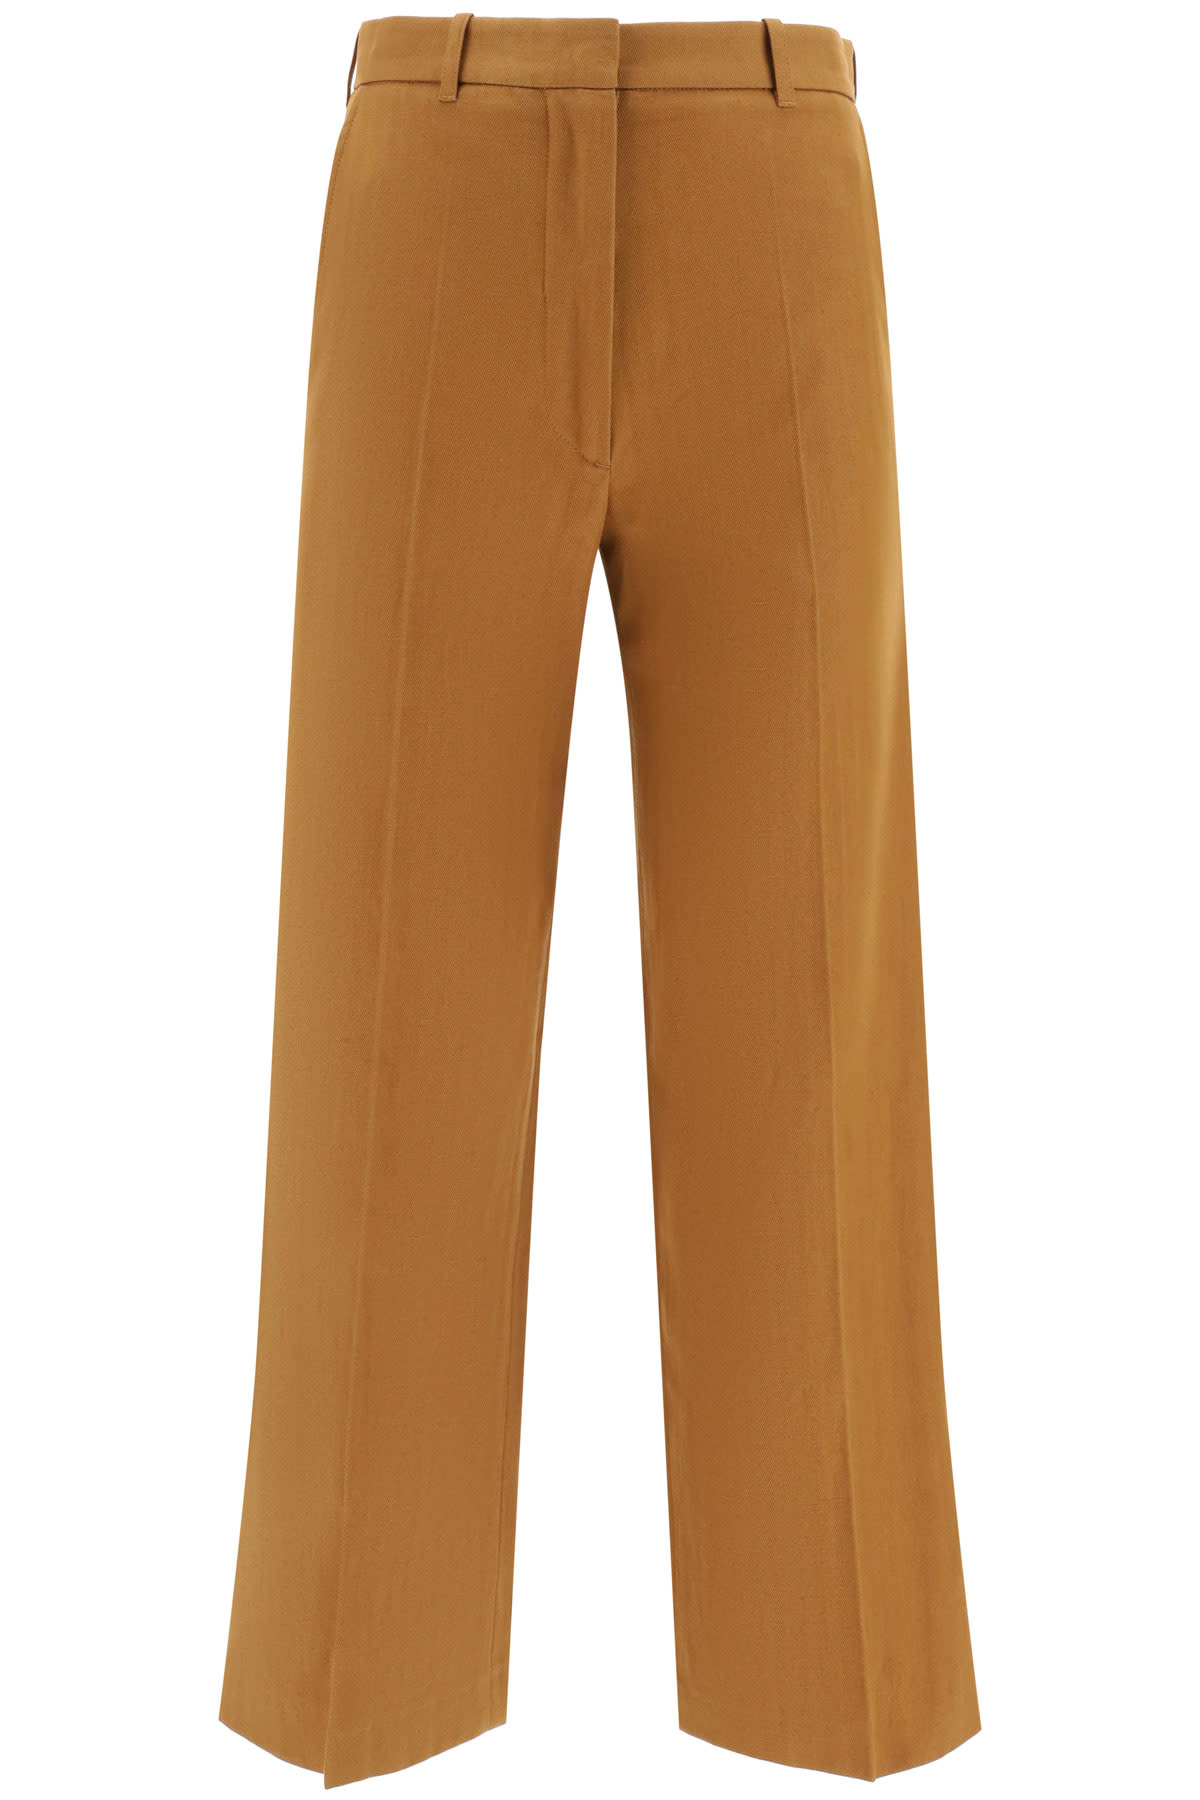 KENZO CROPPED TROUSERS